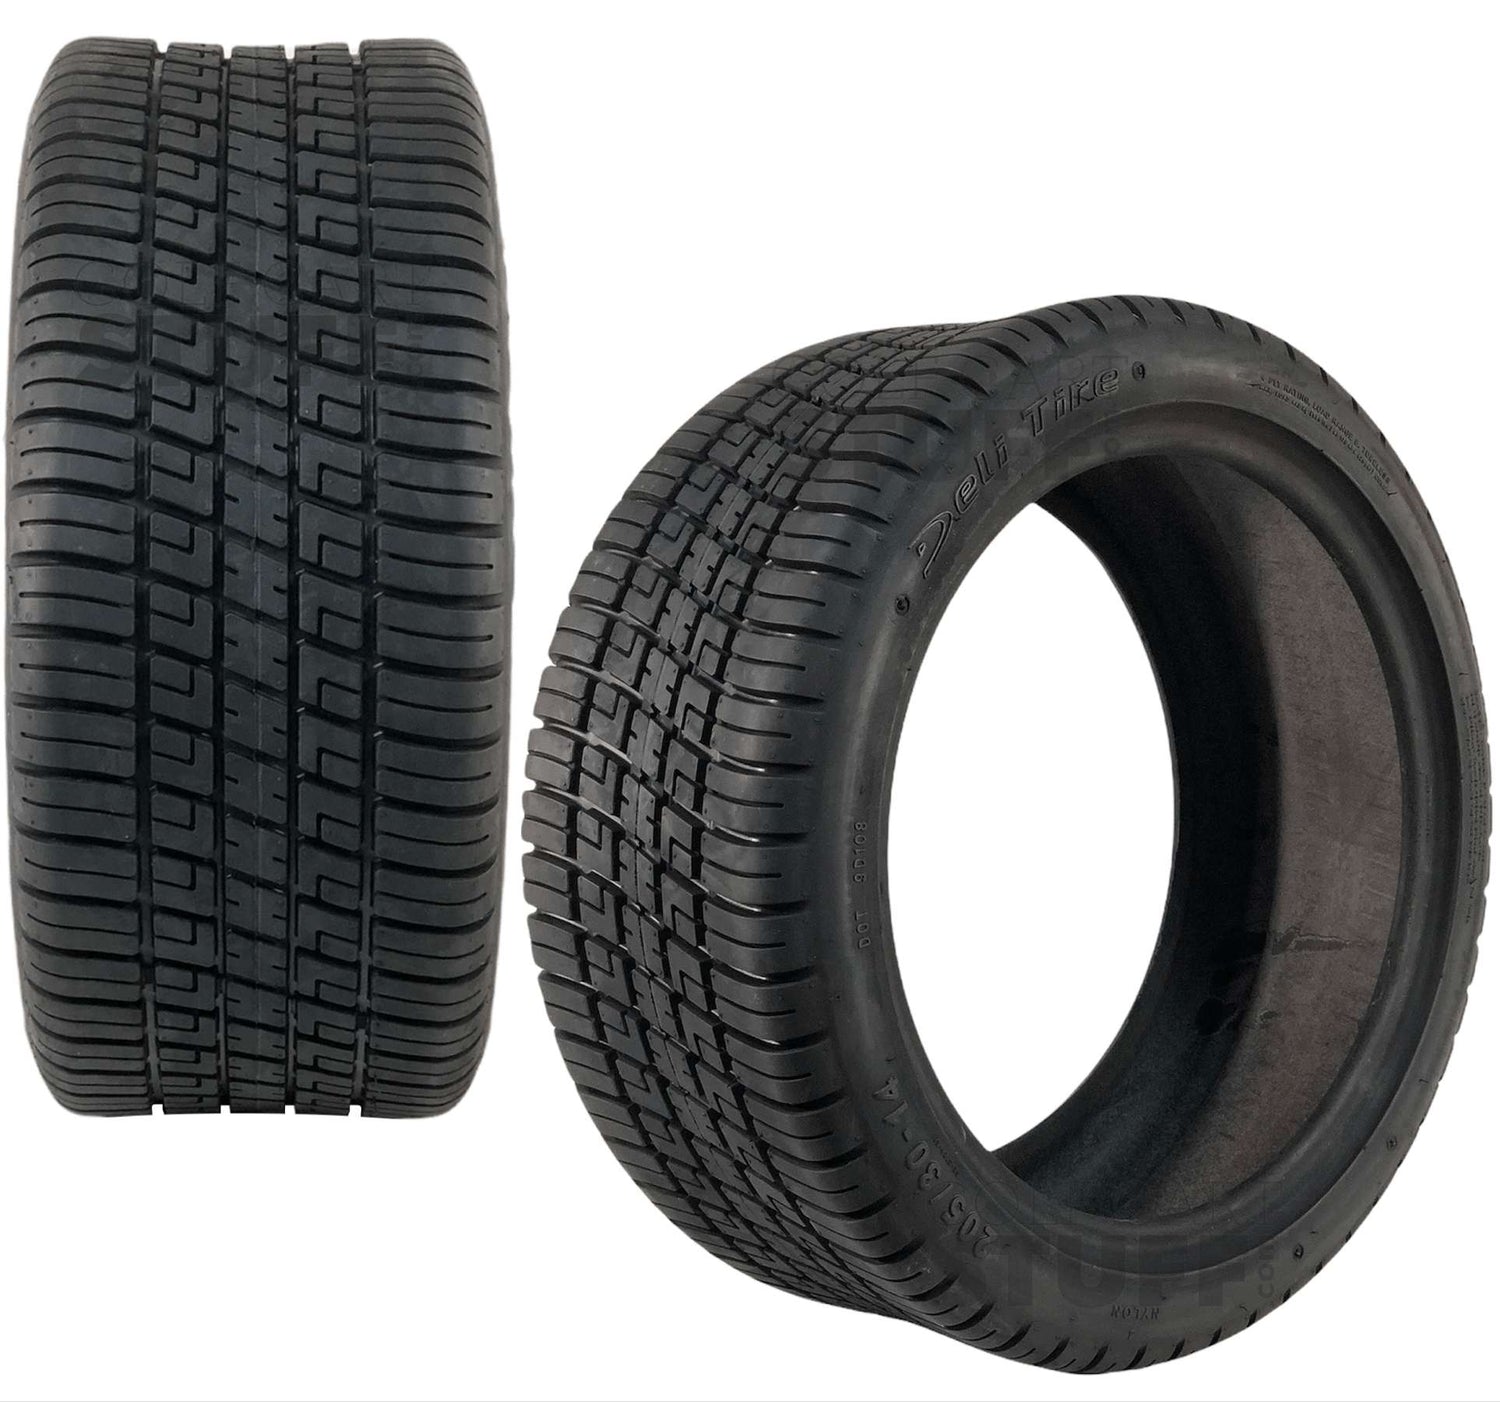 Golf Cart Tires Designed For Use On Street and Golf Courses